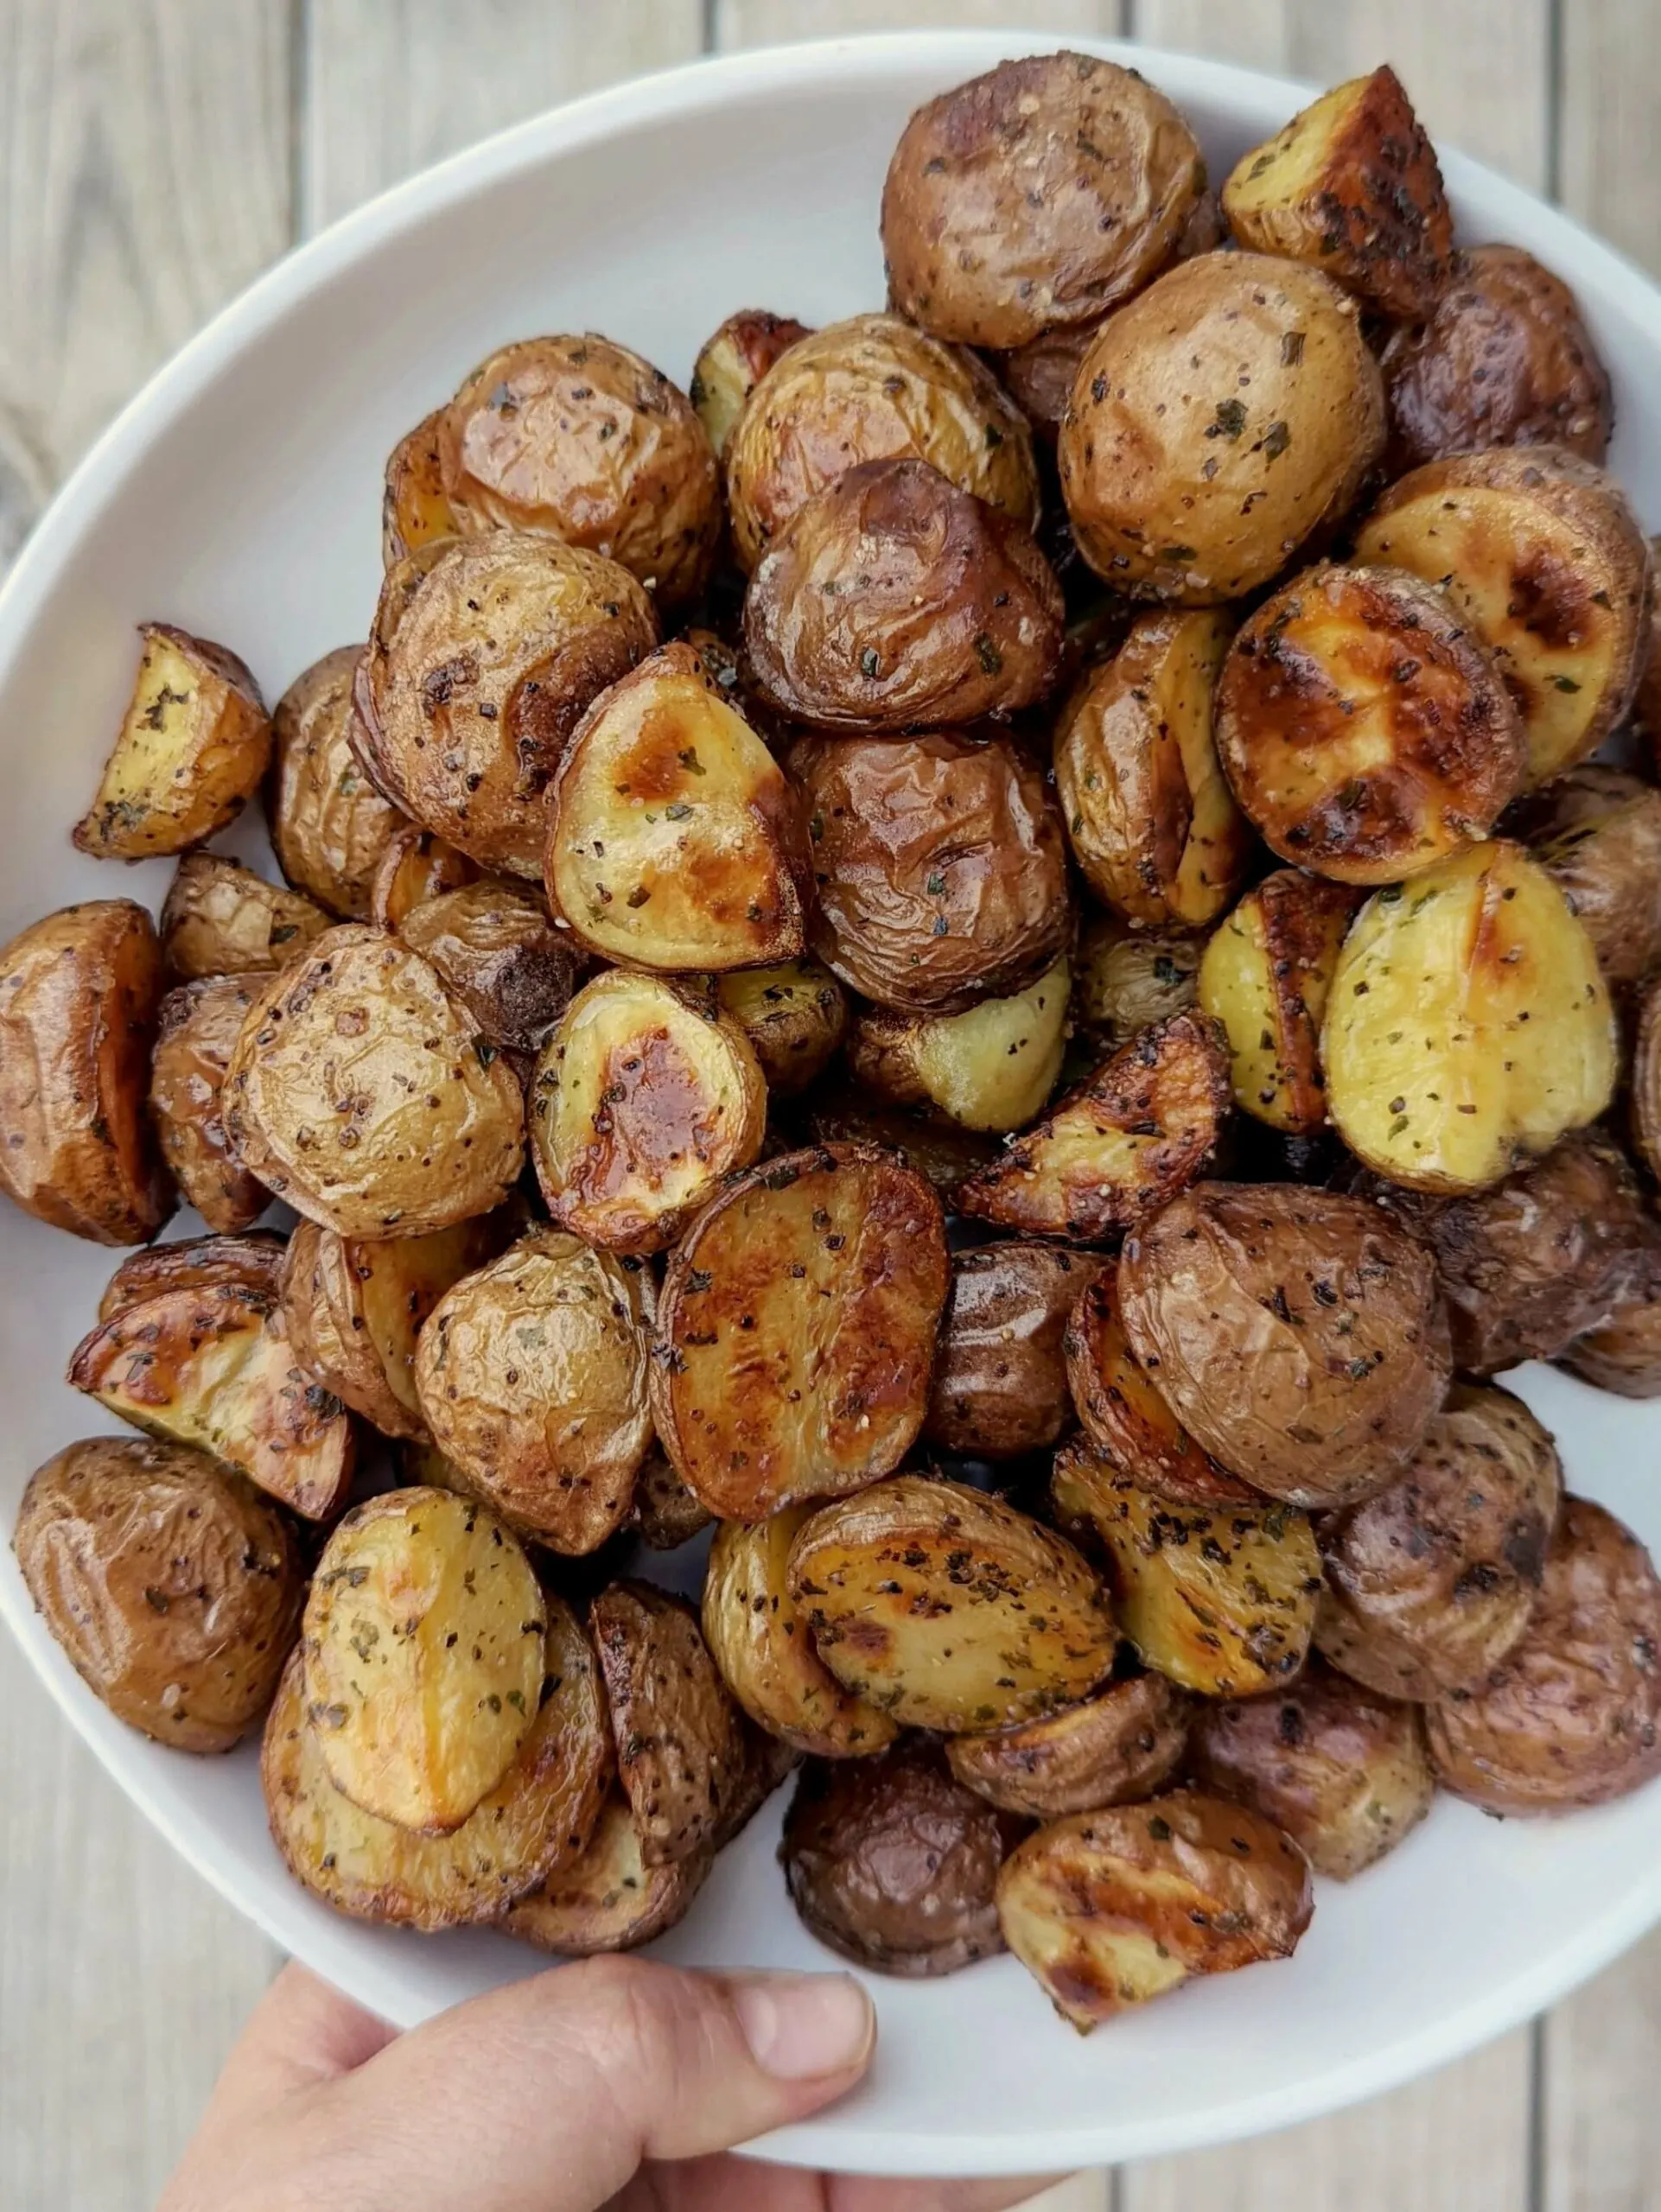 Roasted potatoes on a serving plate.